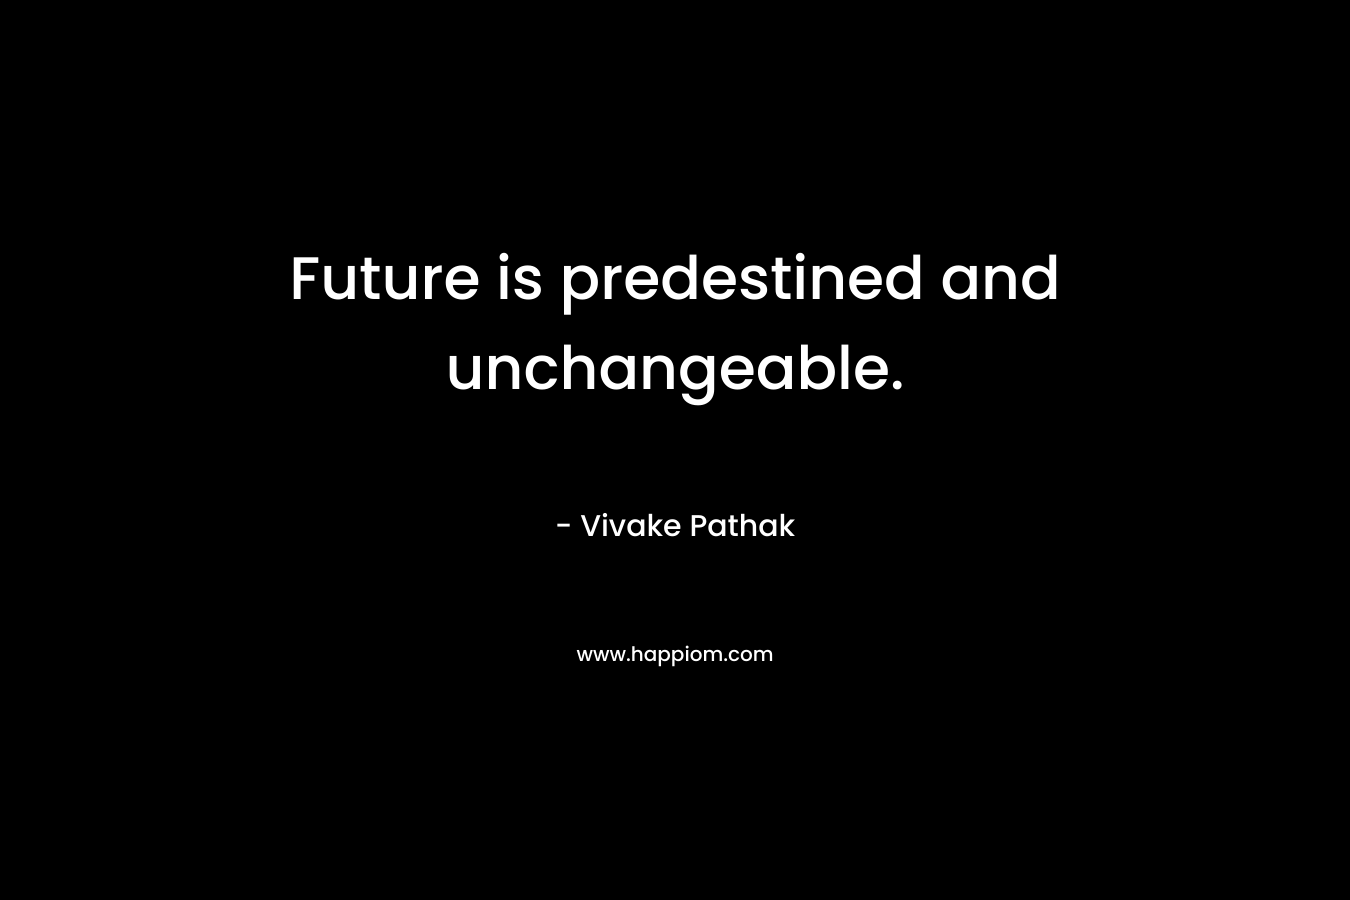 Future is predestined and unchangeable. – Vivake Pathak